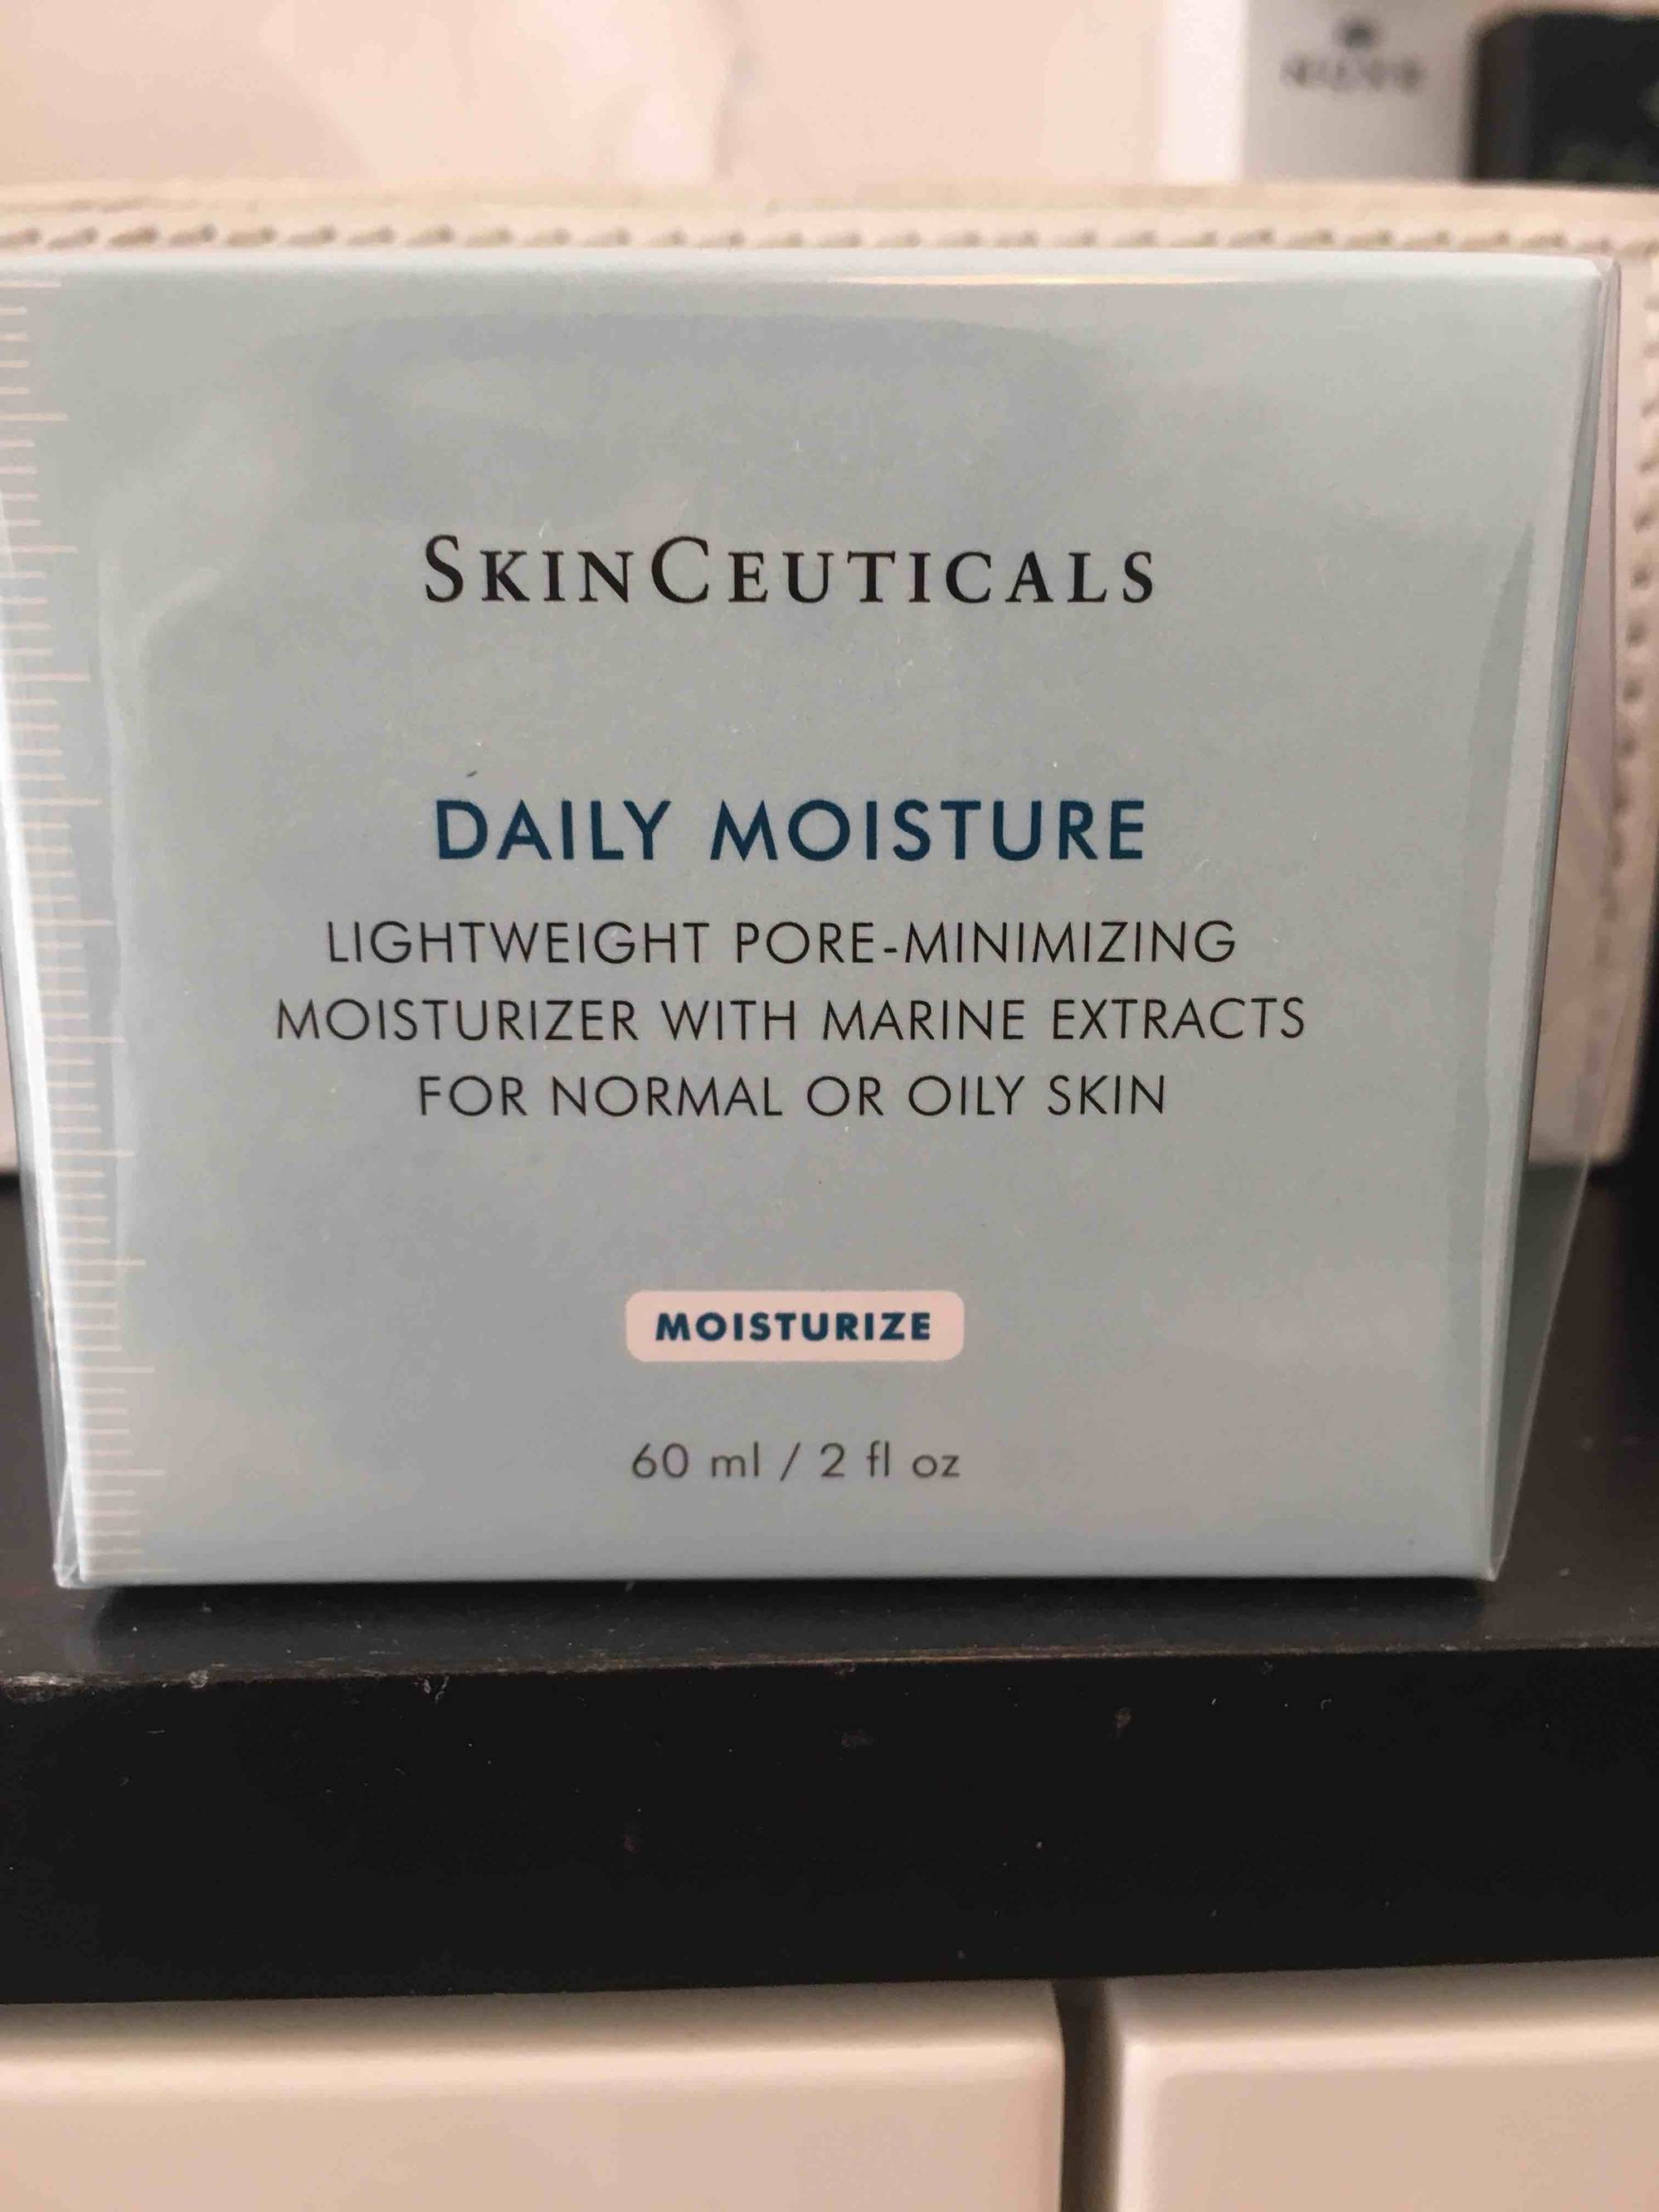 SKINCEUTICALS - Daily moisture - Lightweight pore-minimizing - Moisturizer with marine extracts for normal or oily skin